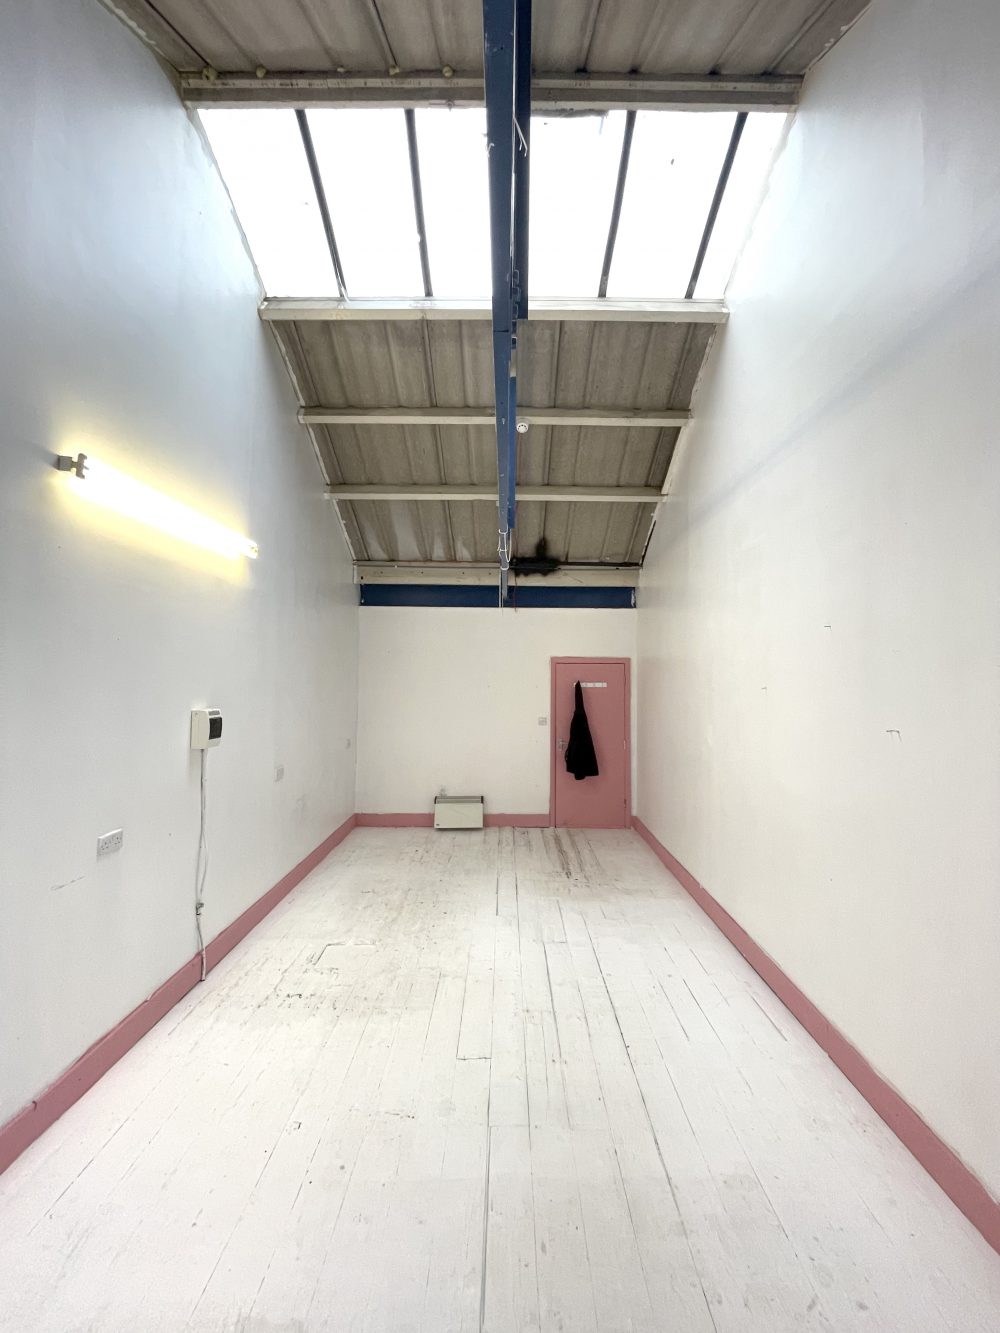 first floor light idustrial creative artist studio to rent in N16 Stoke Newington Shelford Place Pic3